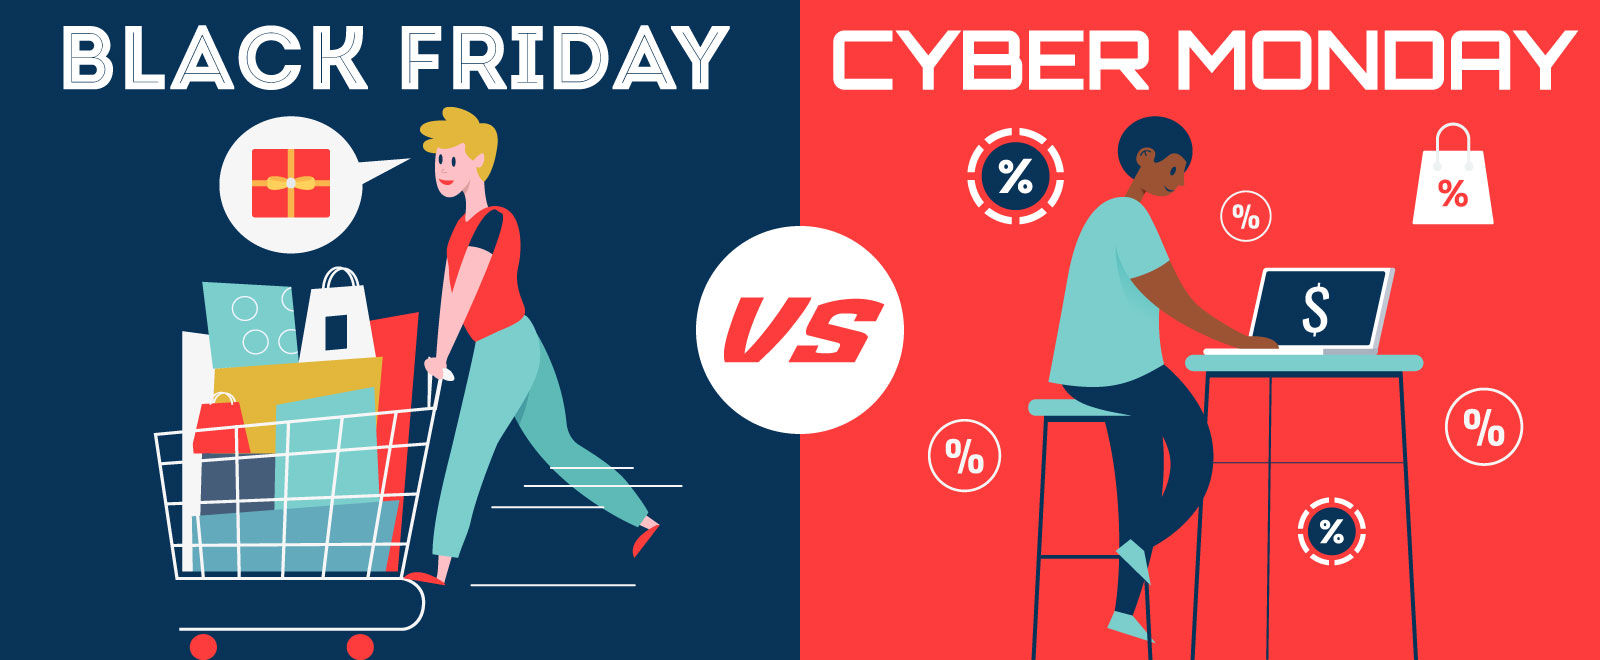 Black Friday vs. Cyber Monday—Which Is Better?